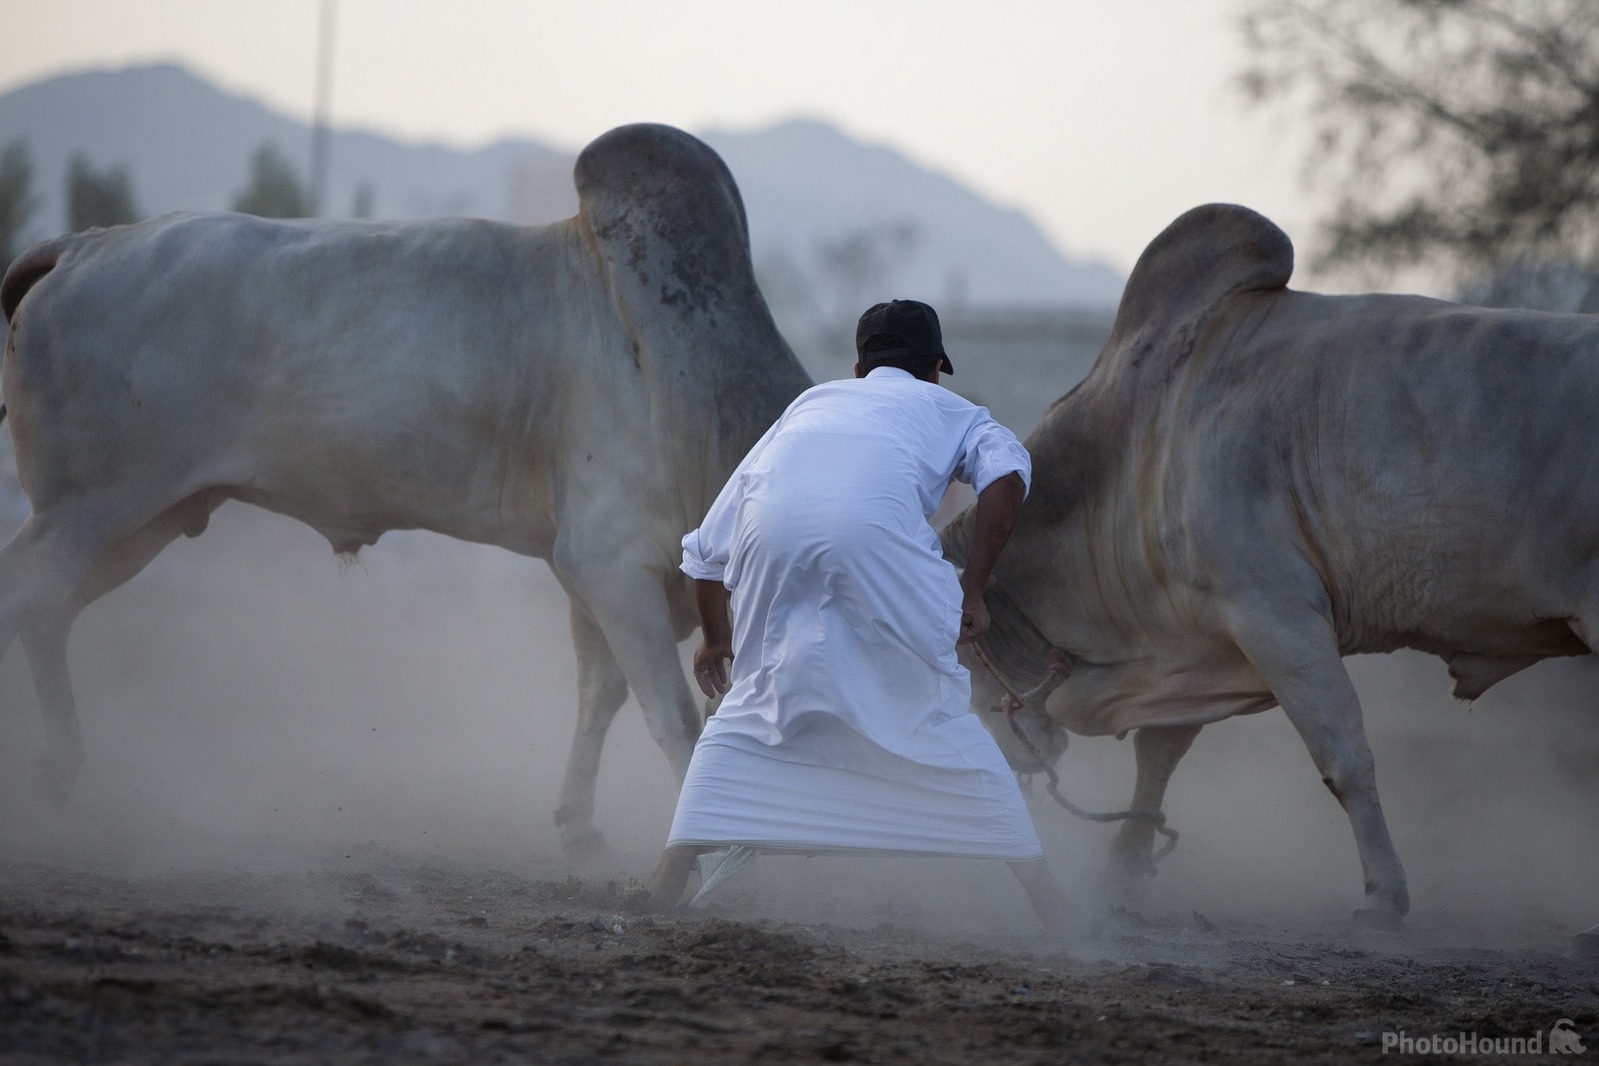 Image of Traditional Bull Fighting at Fujairah by Rivi Wickramarachchi